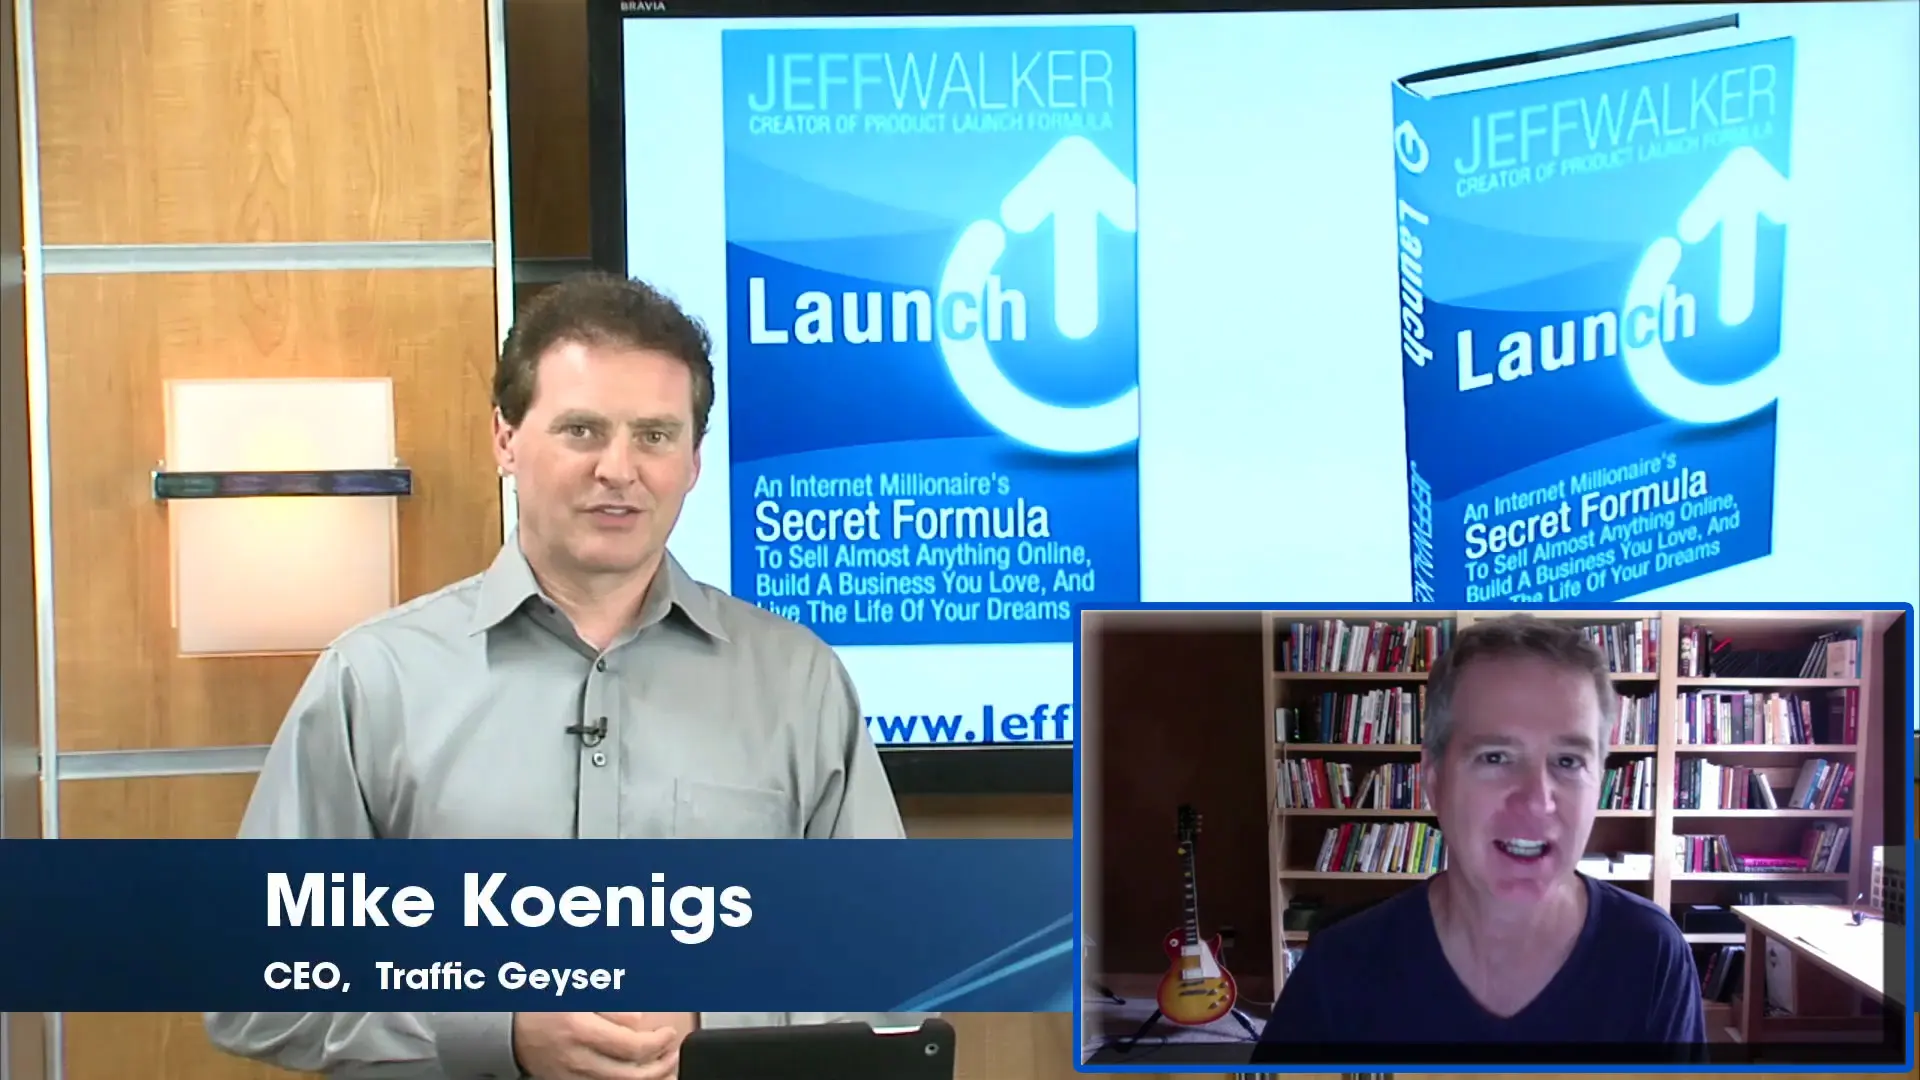 “Launch” Book Interview with Jeff Walker and Mike Koenigs How to Publish, Promote, Launch and Presell a Book to Grow Your Audience, Reach, List, Income and Legacy